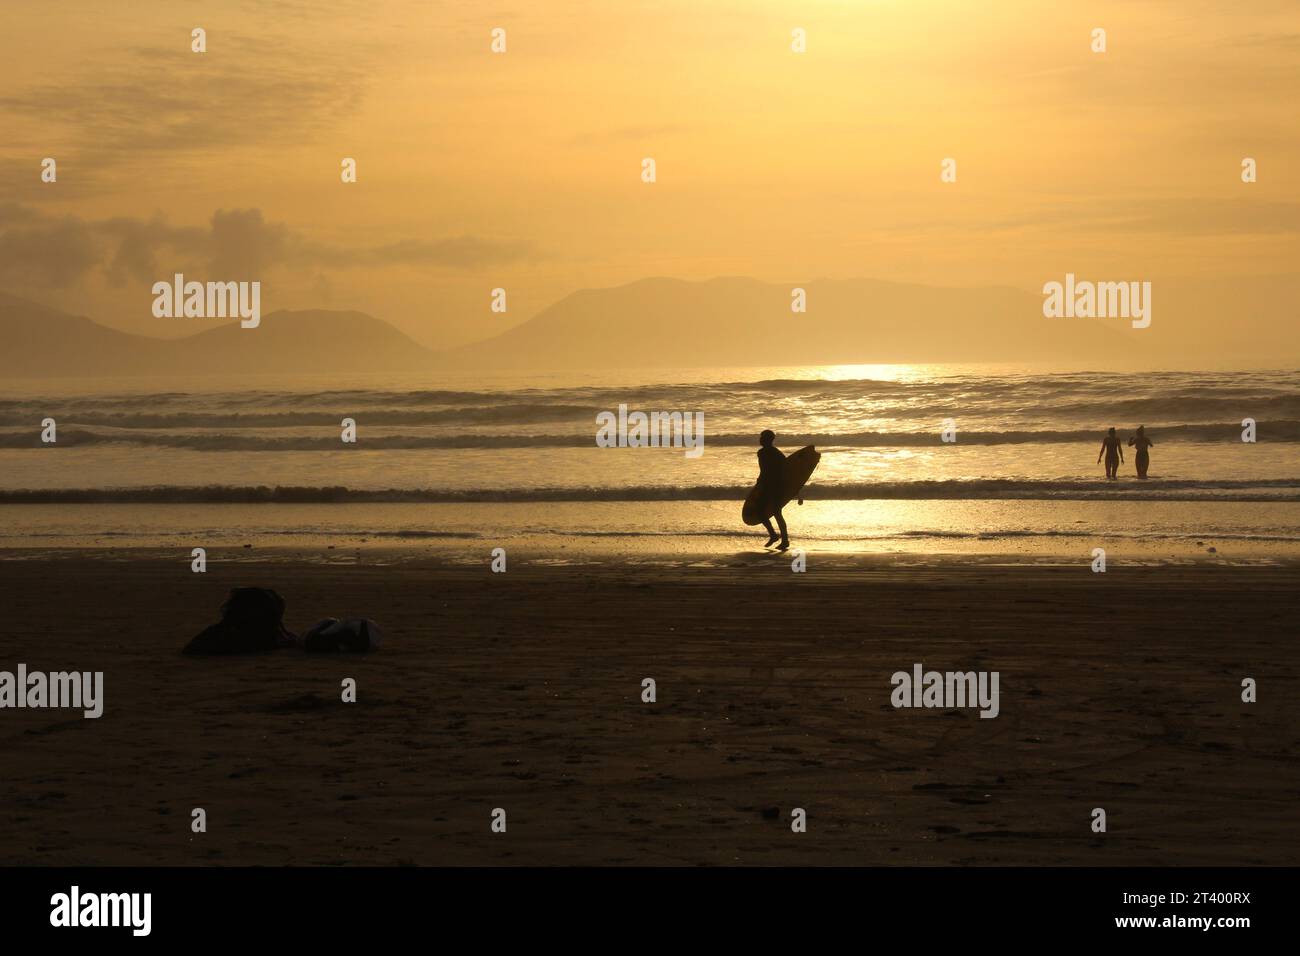 Silhouette of a person surfing at Inch beach at sunset with swimmers in the water - Dingle Peninsula, Kerry, Ireland. Concept for cold water swimming Stock Photo